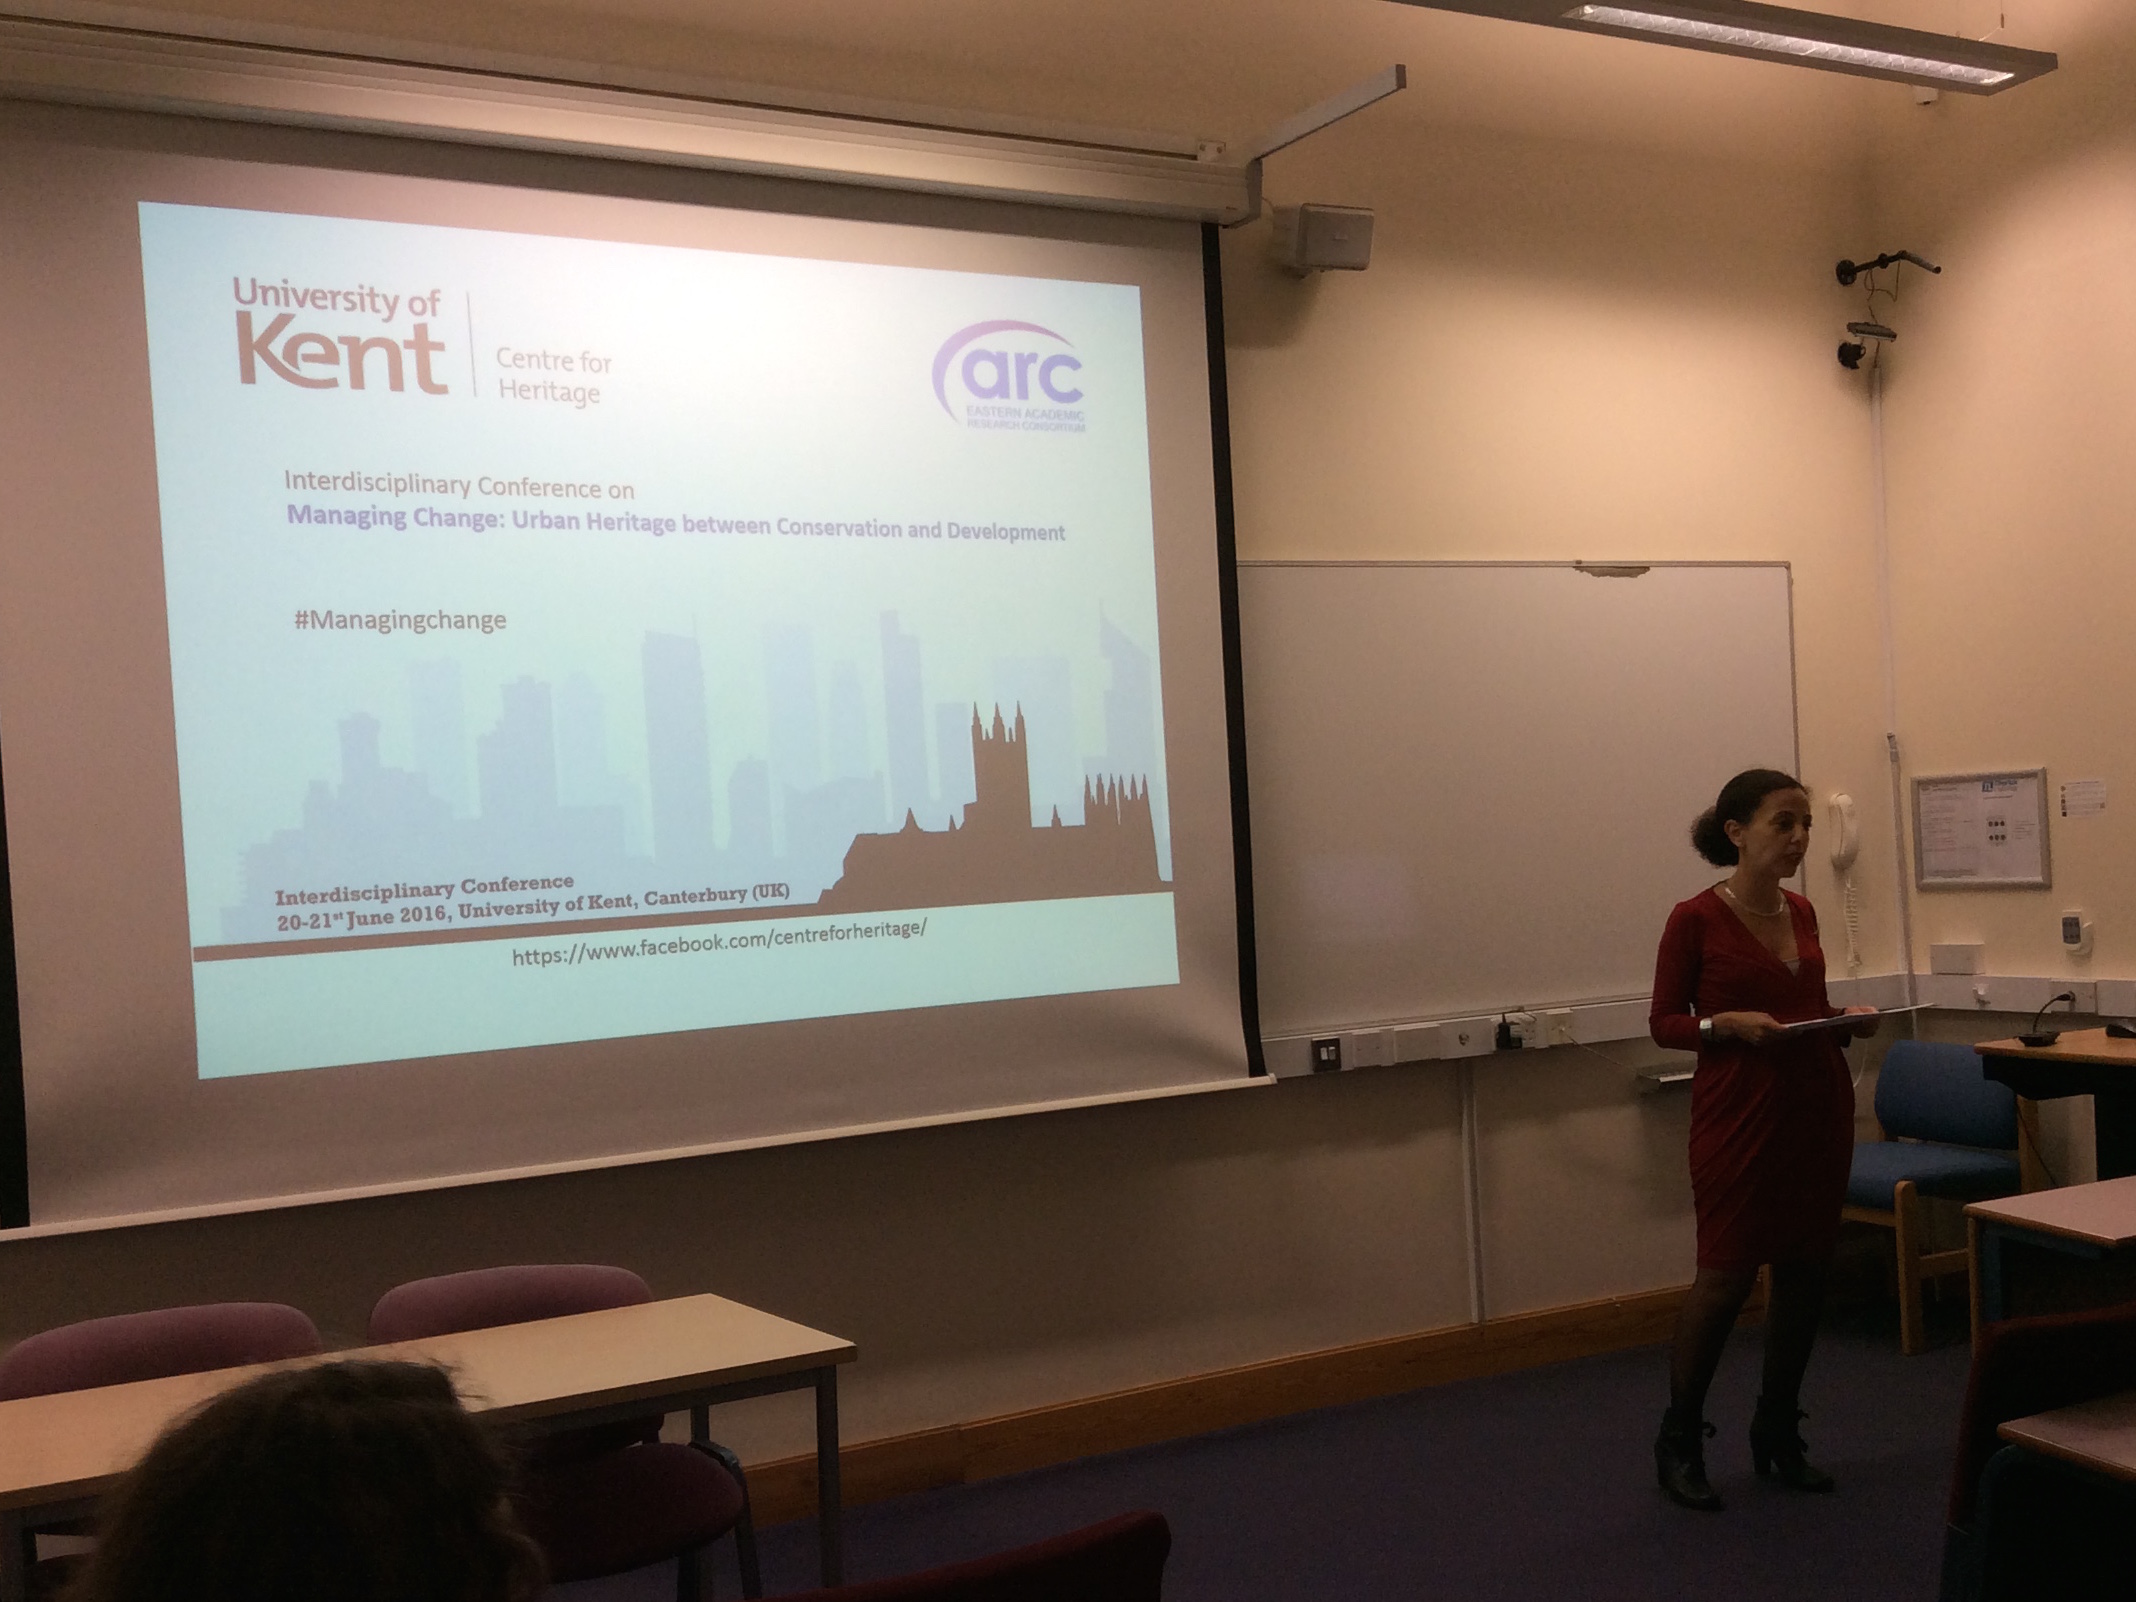 Welcome by Dr Sophia Labadi, Co-Director, Centre for Heritage, University of Kent